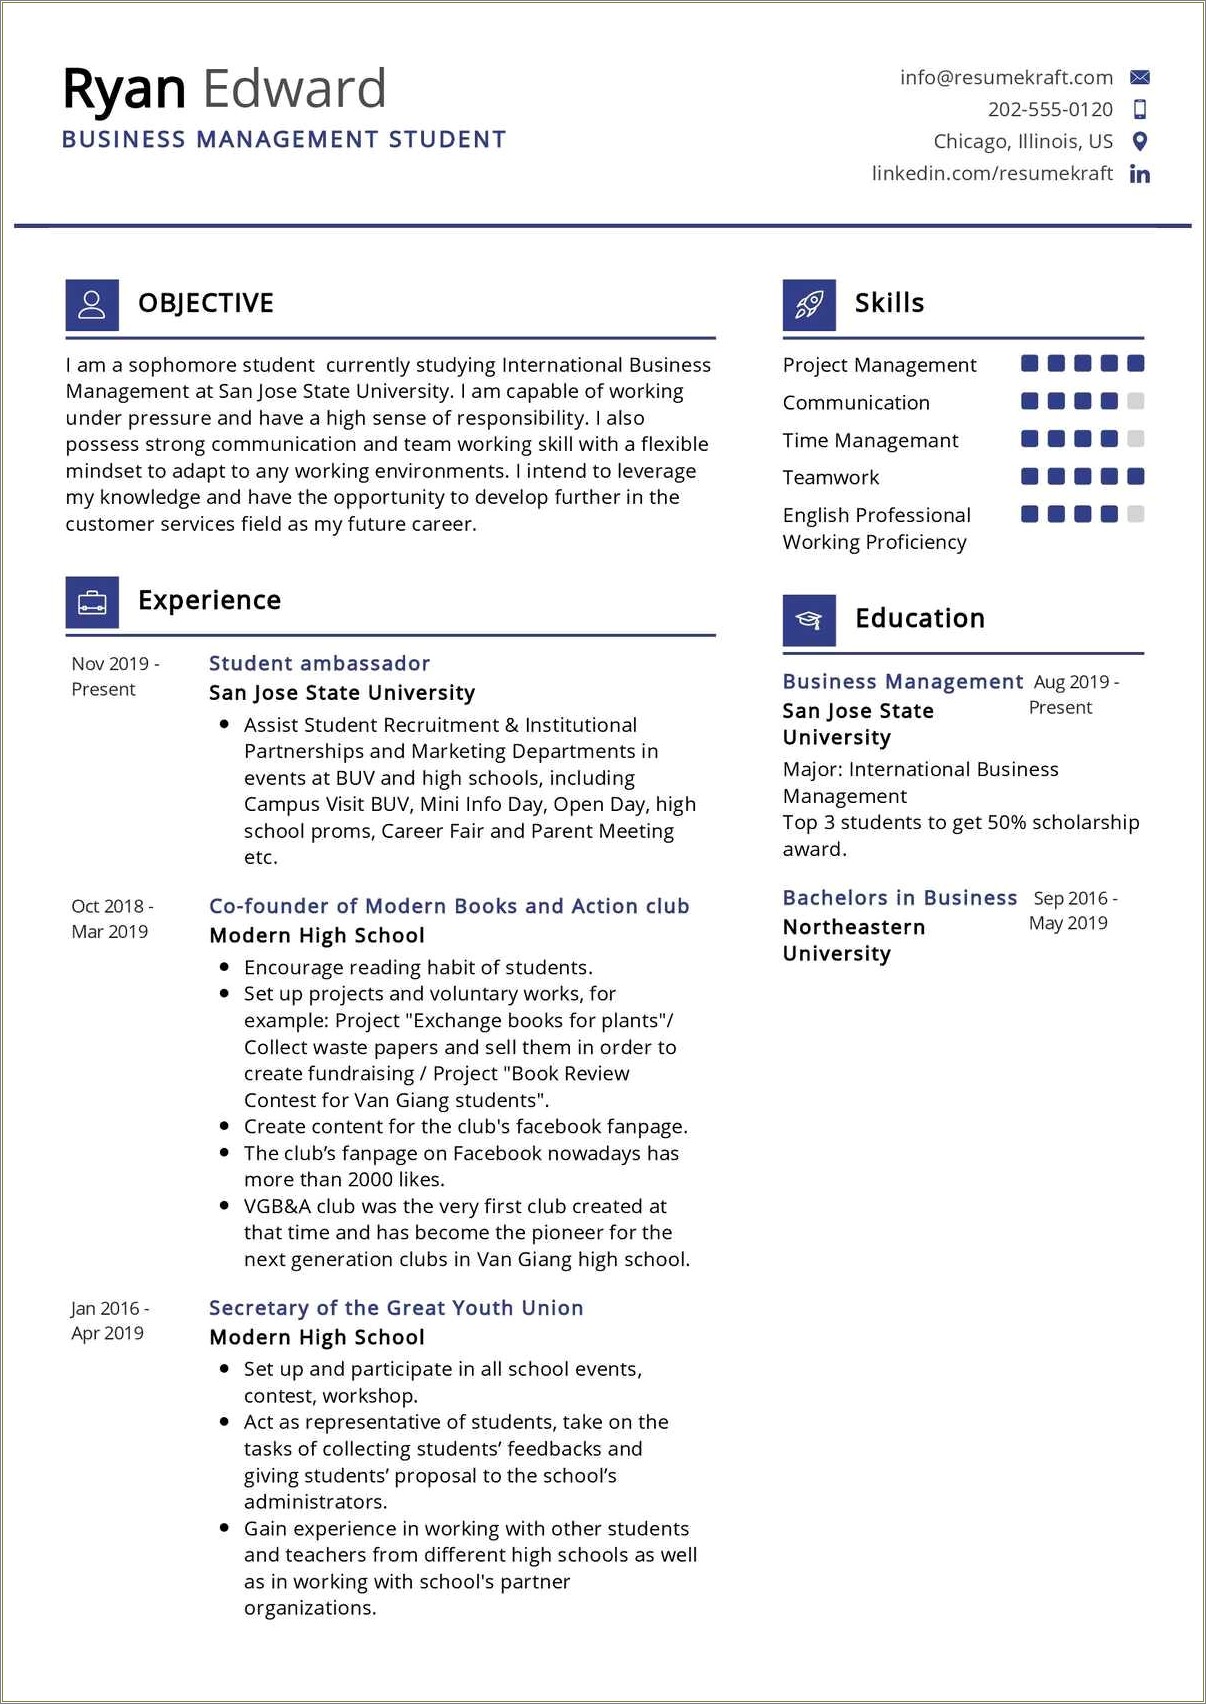 Best Skills As A Business Owner For Resume